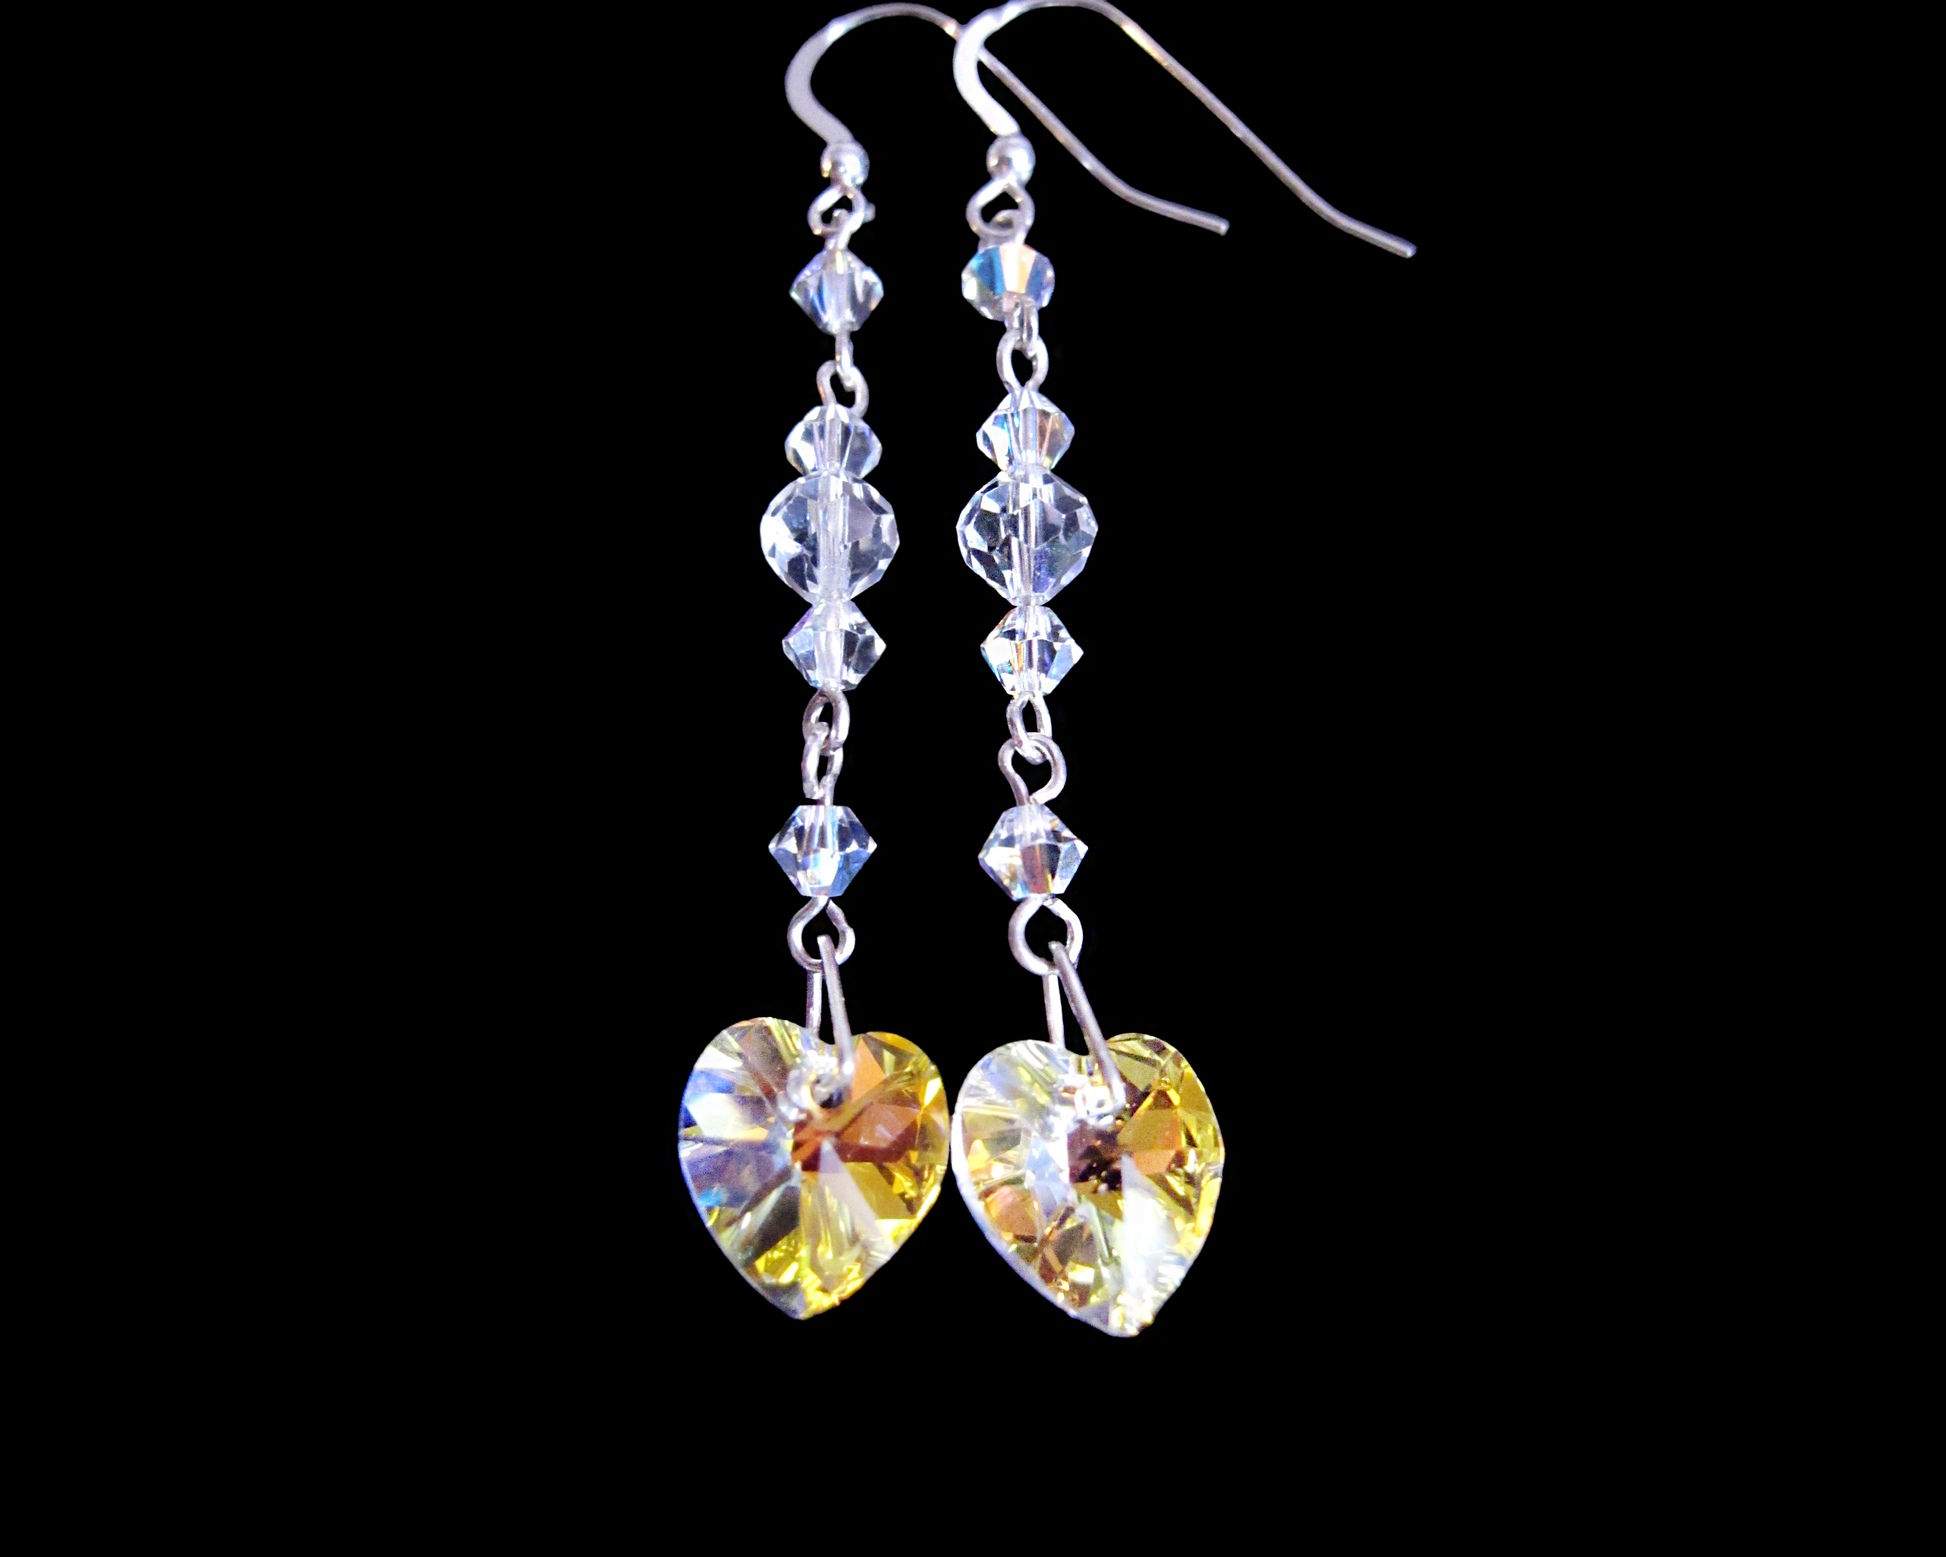 Long Dangly Crystal Heart Earrings -Art Deco Inspired-Sterling Silver-New and Vintage Clear AB Crystal